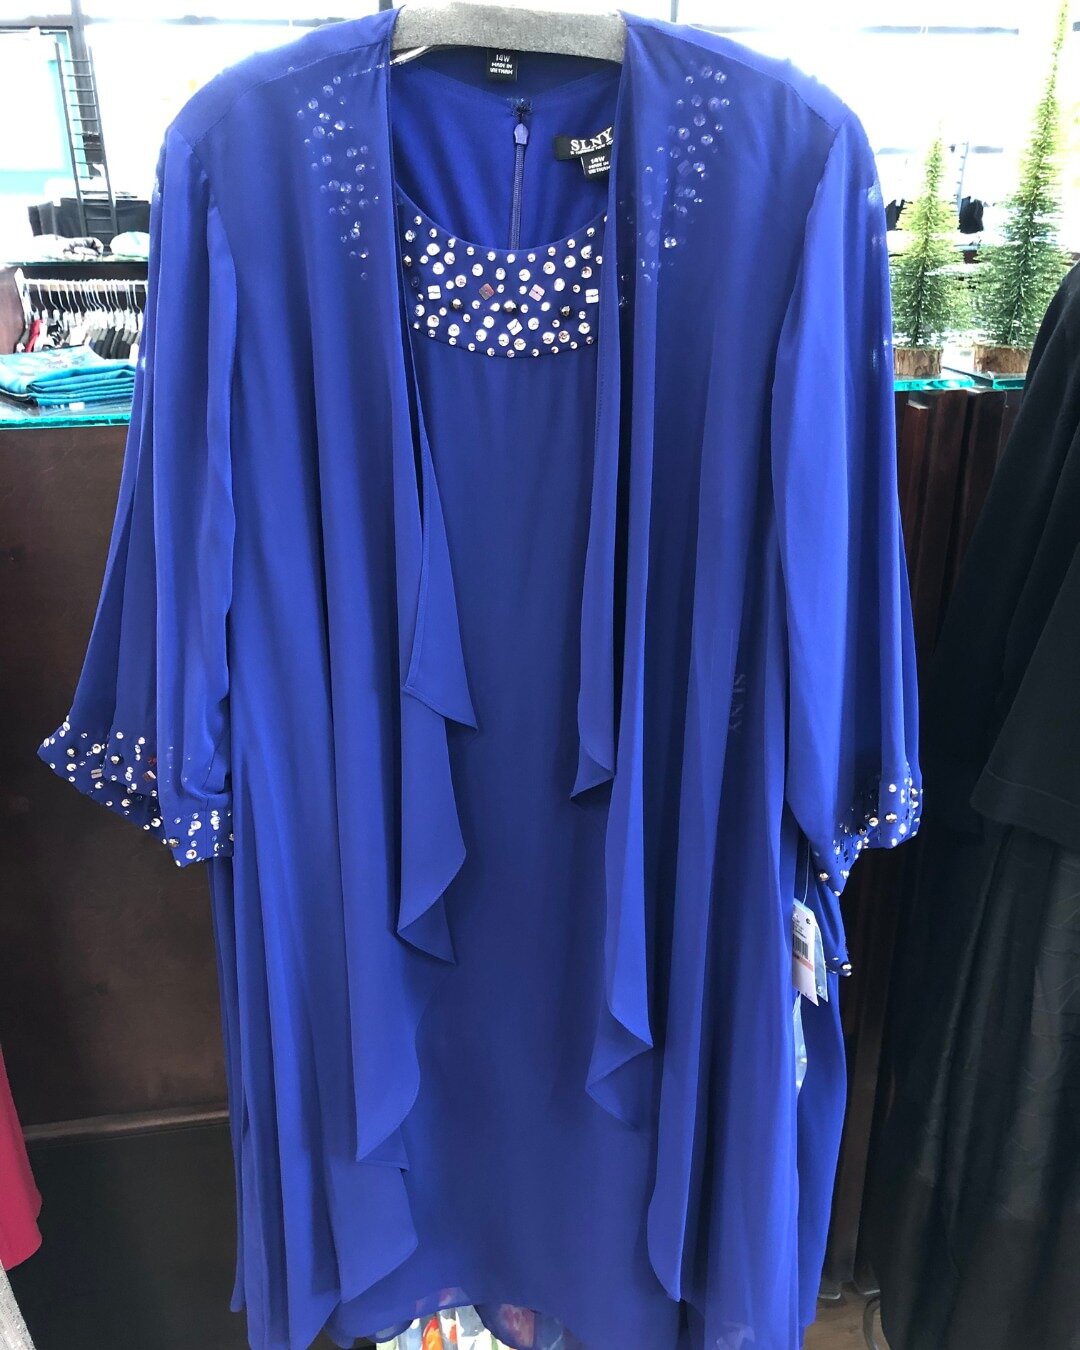 Shine bright like a diamond with our latest arrival! 💎✨ This stunning blue dress with its sparkling collar (&amp; sleeves) it is the perfect statement piece for your next special occasion! 

From weddings to galas and everything in between, you'll t